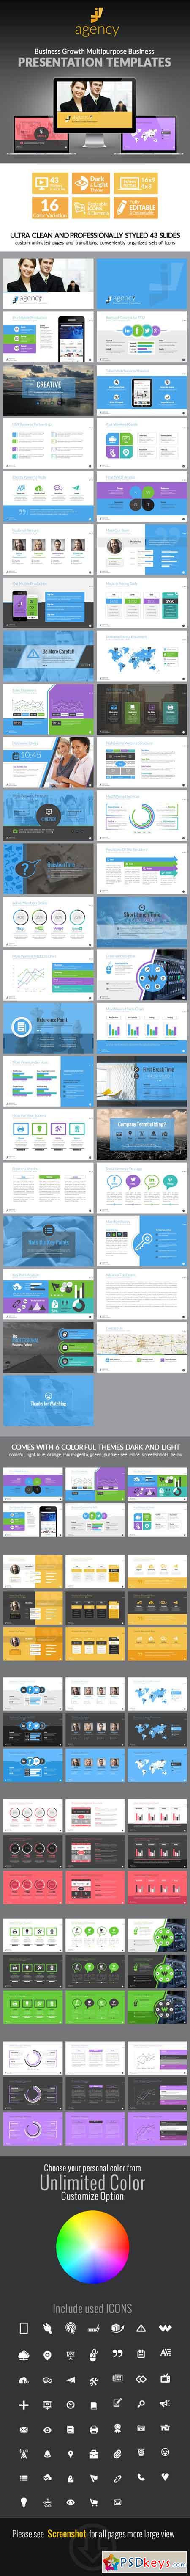 Business Growth Presentation Template 8206060